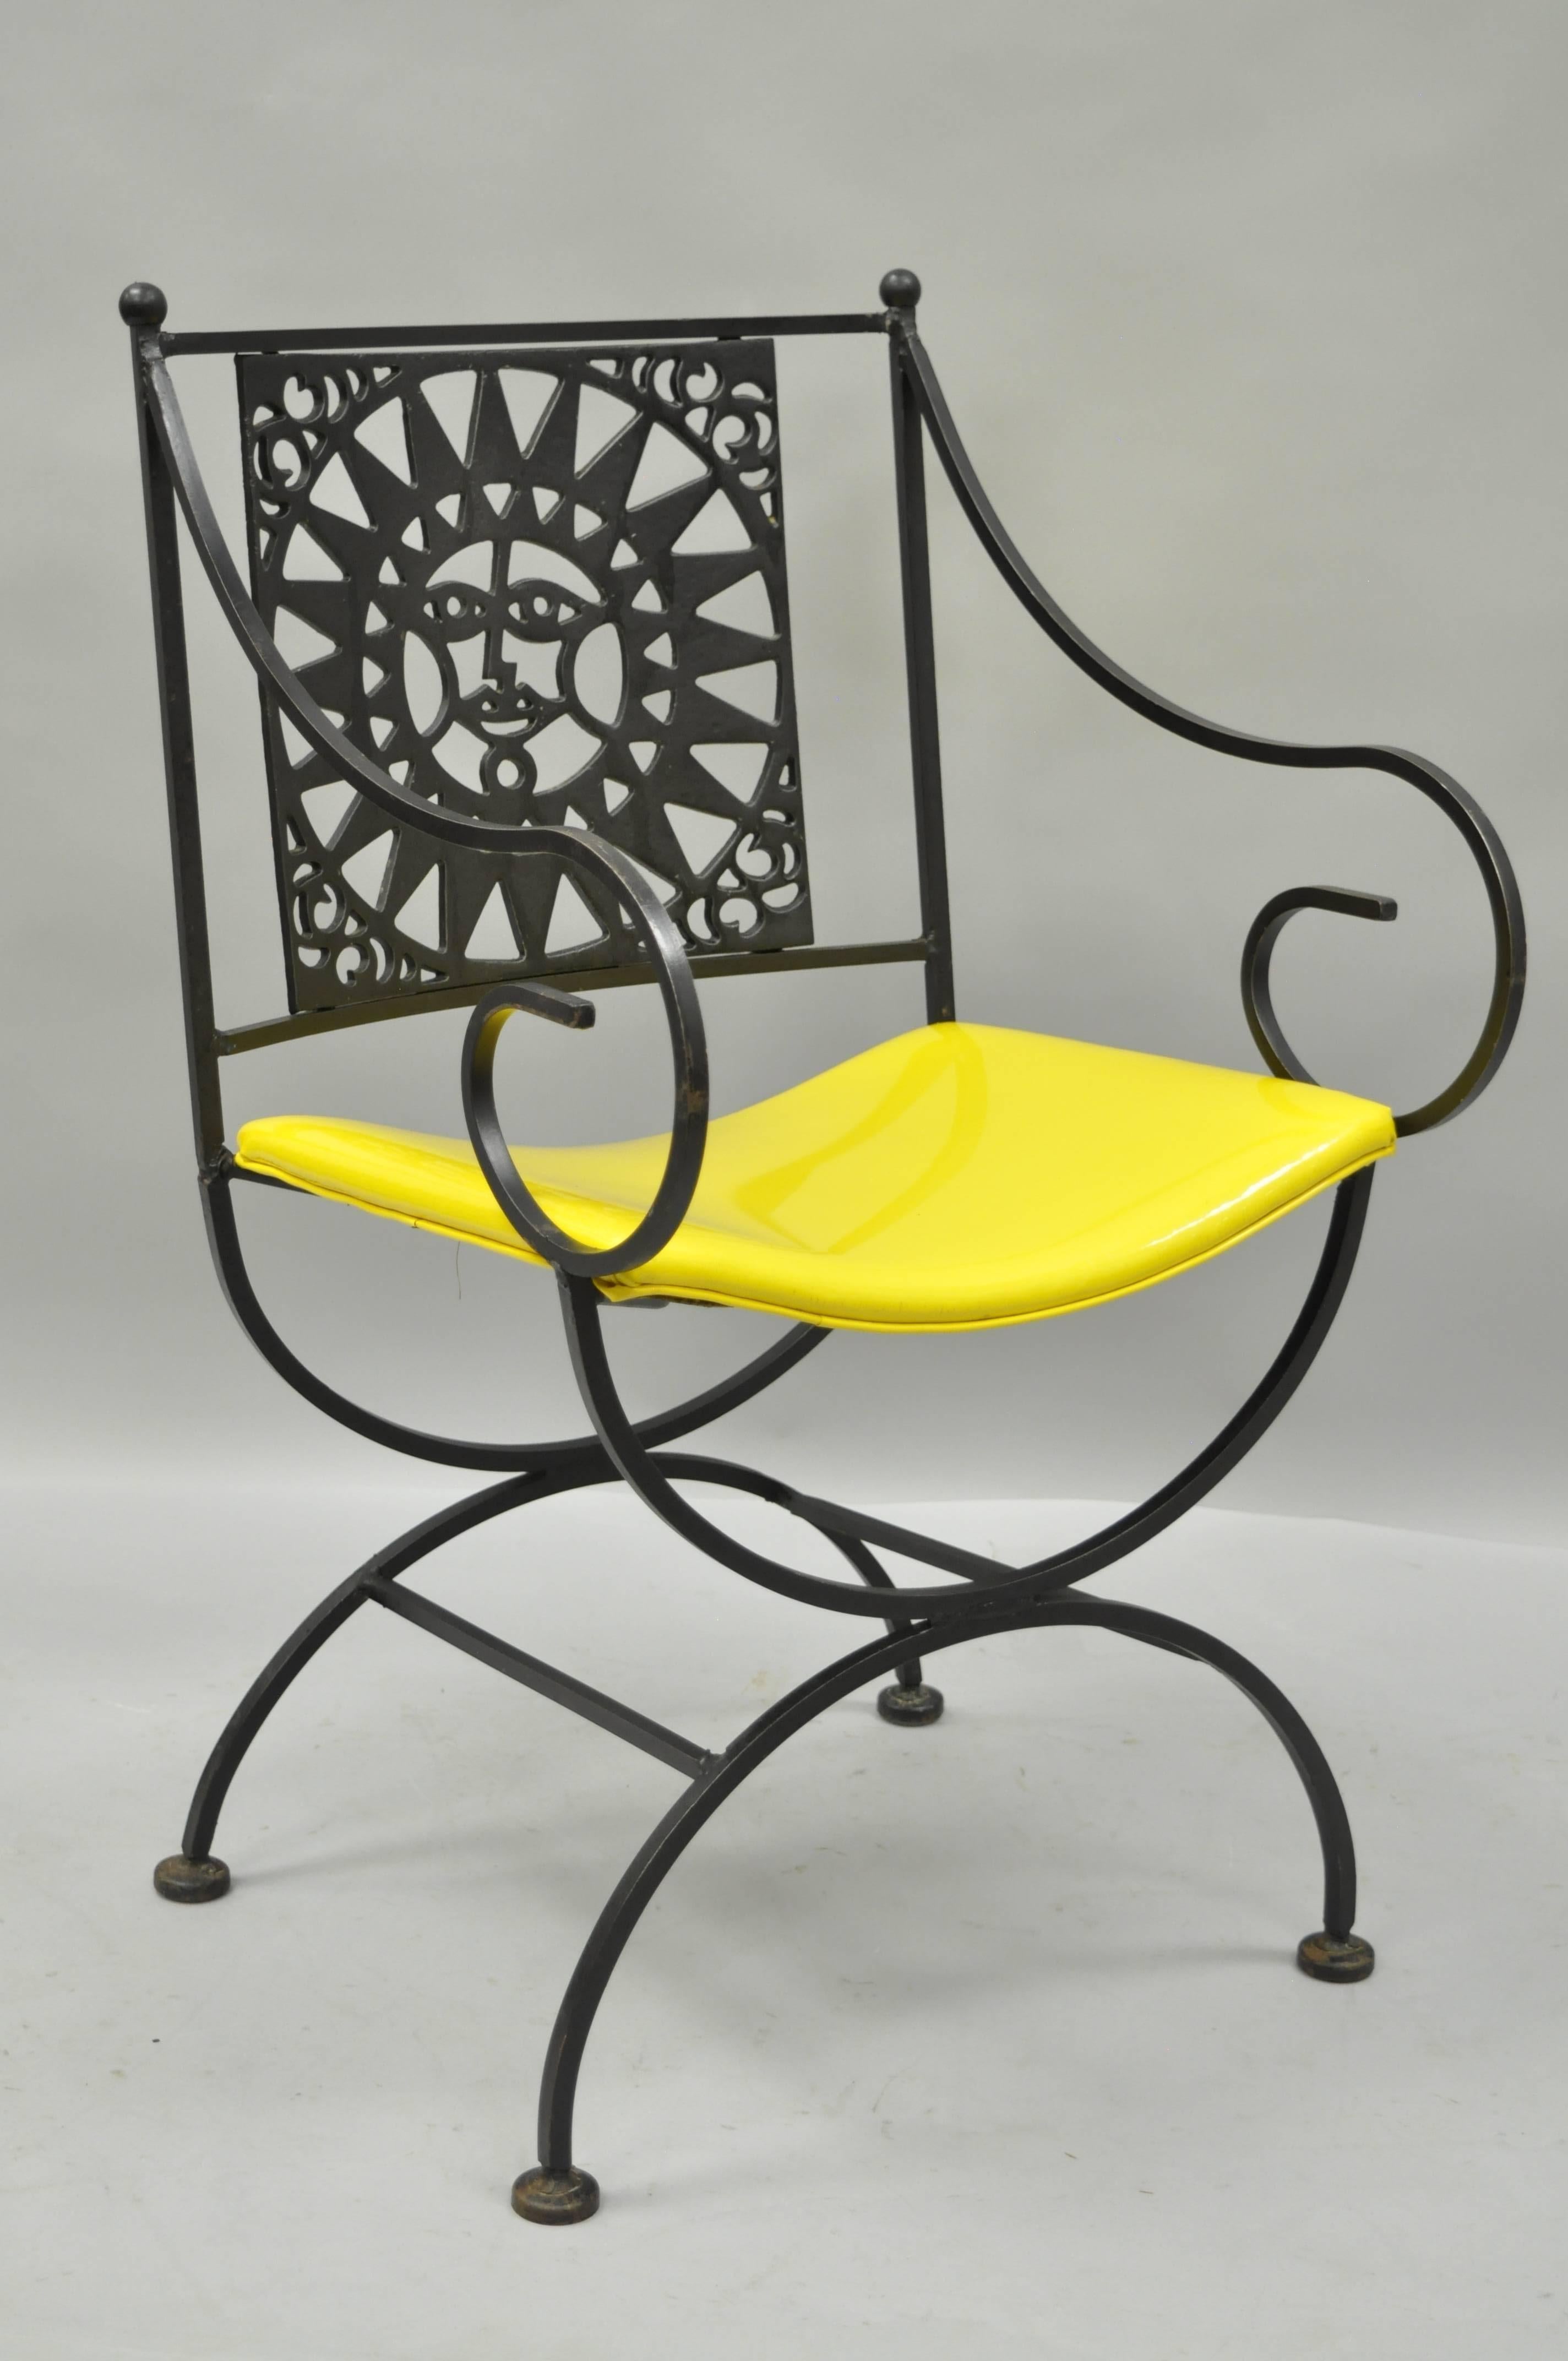 Vintage Mid-Century Modern 1960s wrought iron directors chair with sun back from the Mayan Collection by Arthur Umanoff. This wonderful handcrafted chair features a unique X-form base, ball form finials, whimsically scrolled arms, and bright yellow